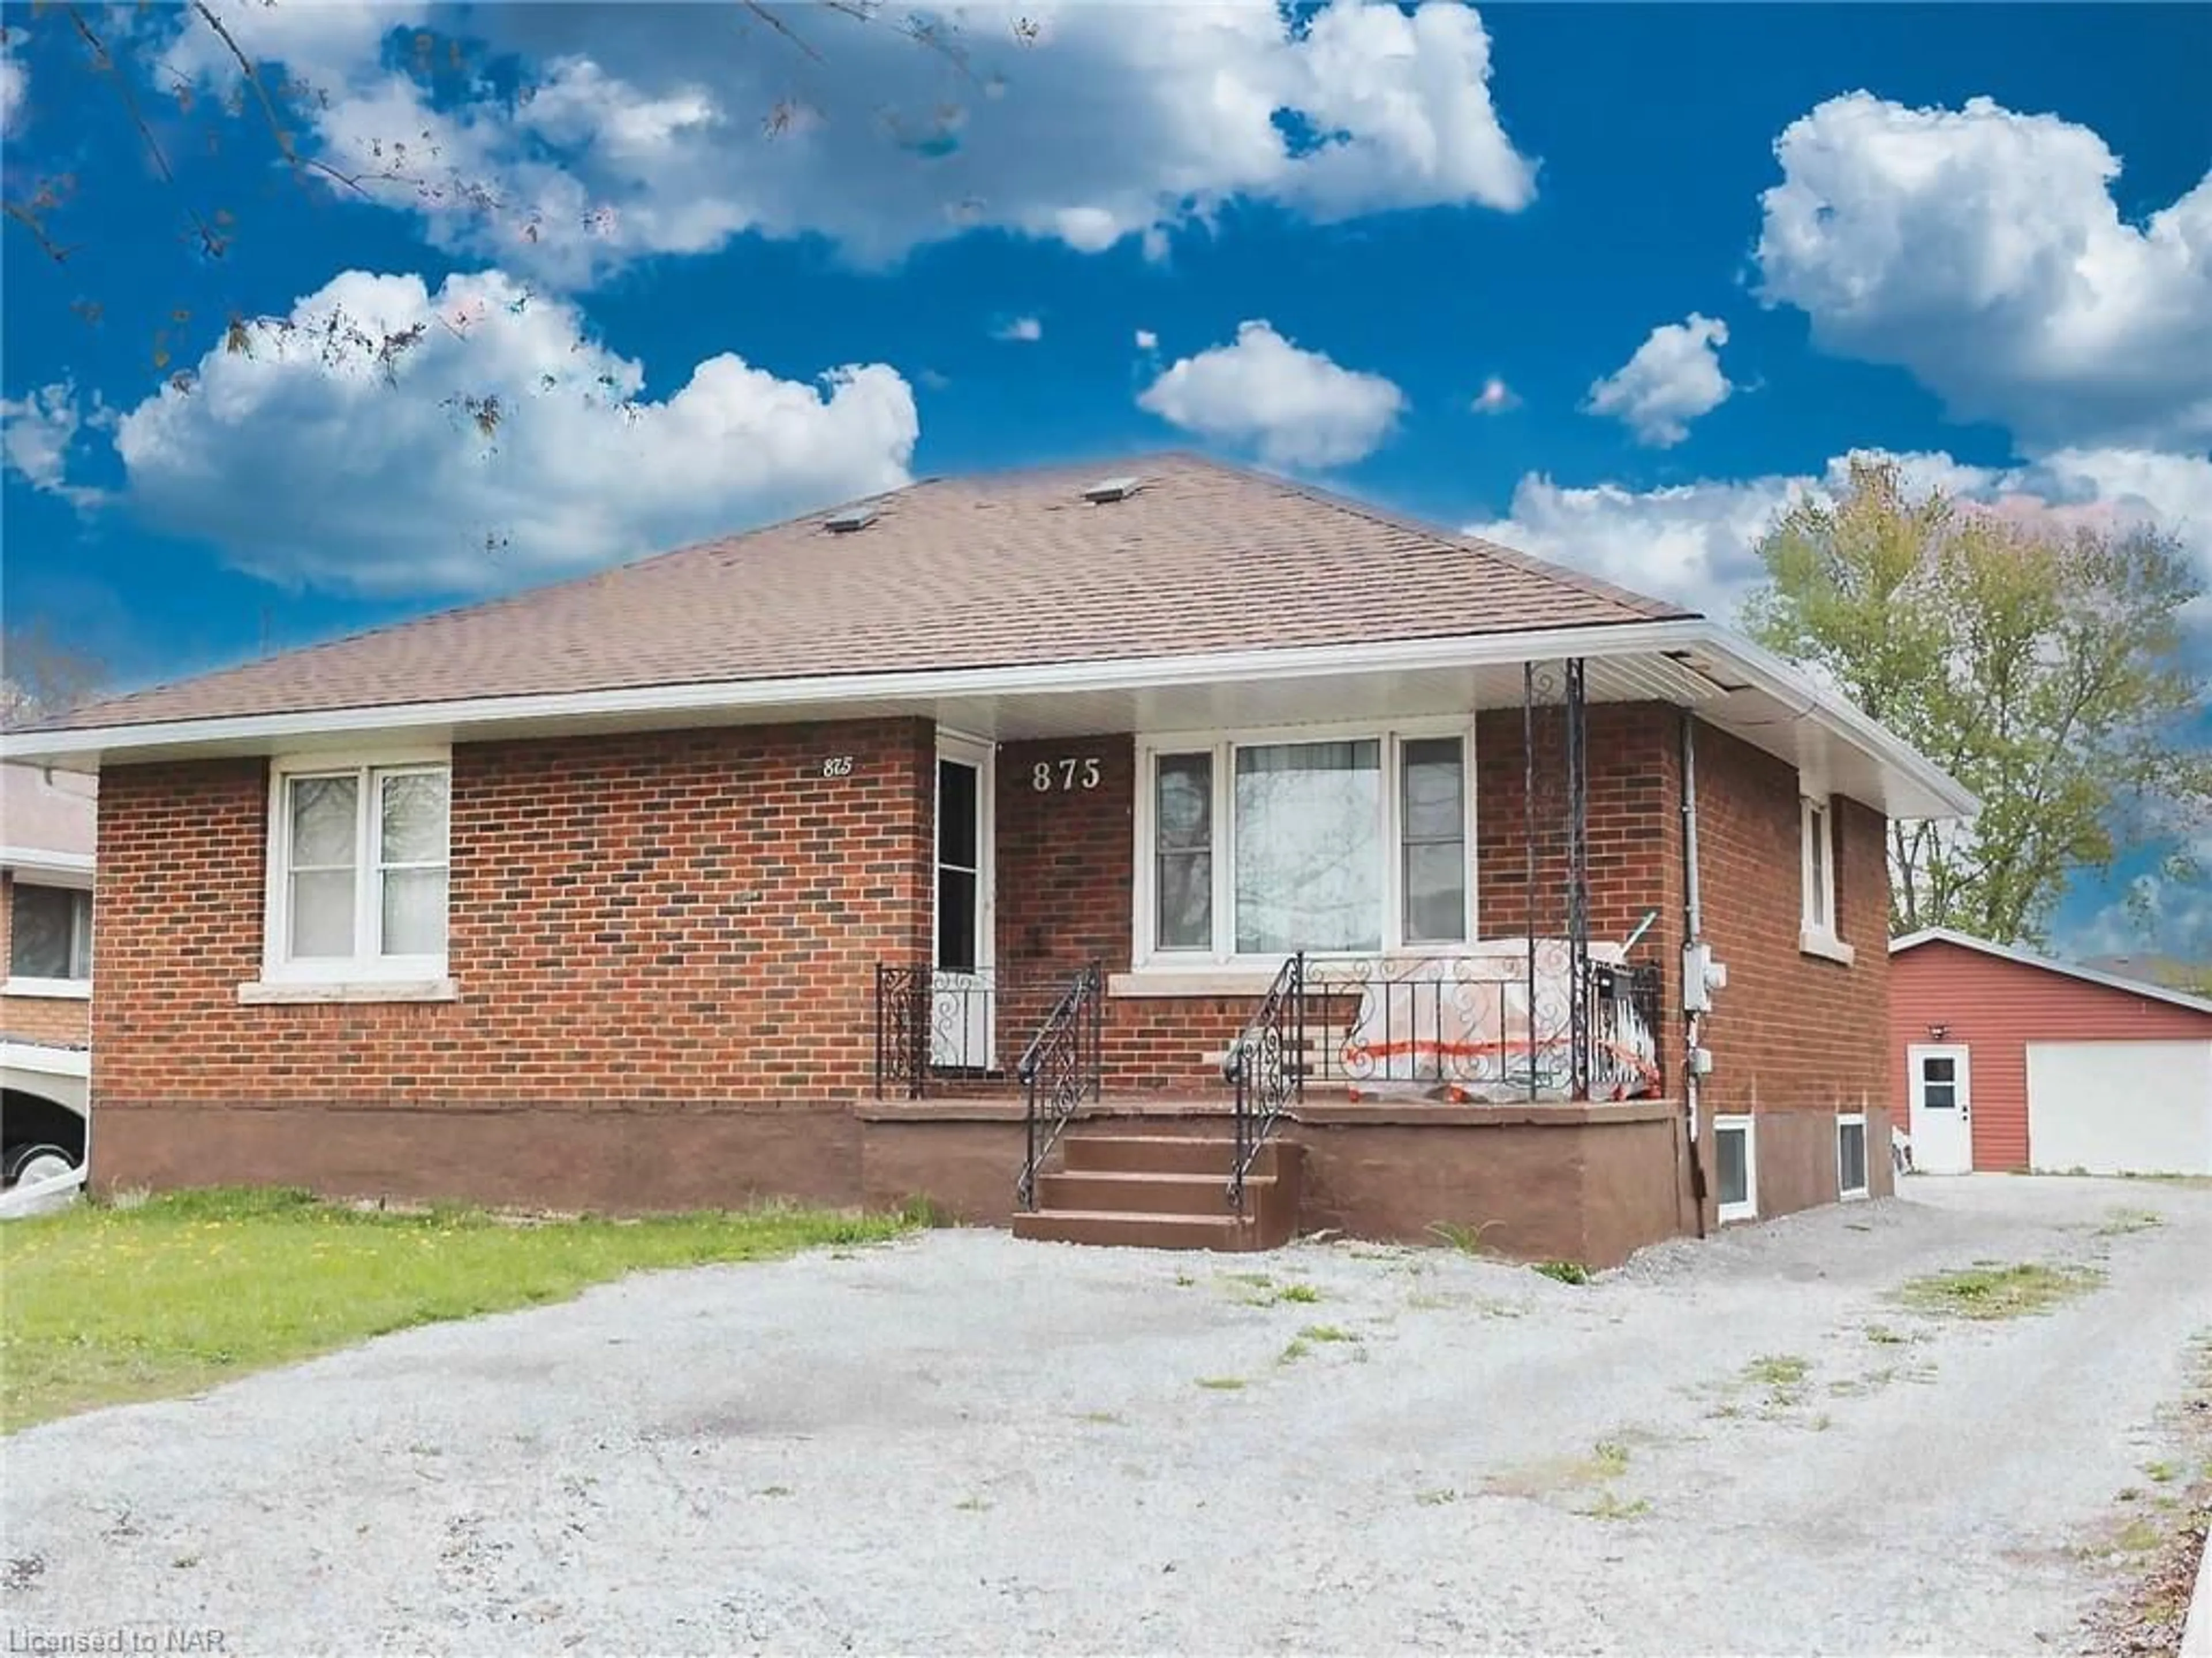 Home with brick exterior material for 875 Southworth St, Welland Ontario L3B 2A2